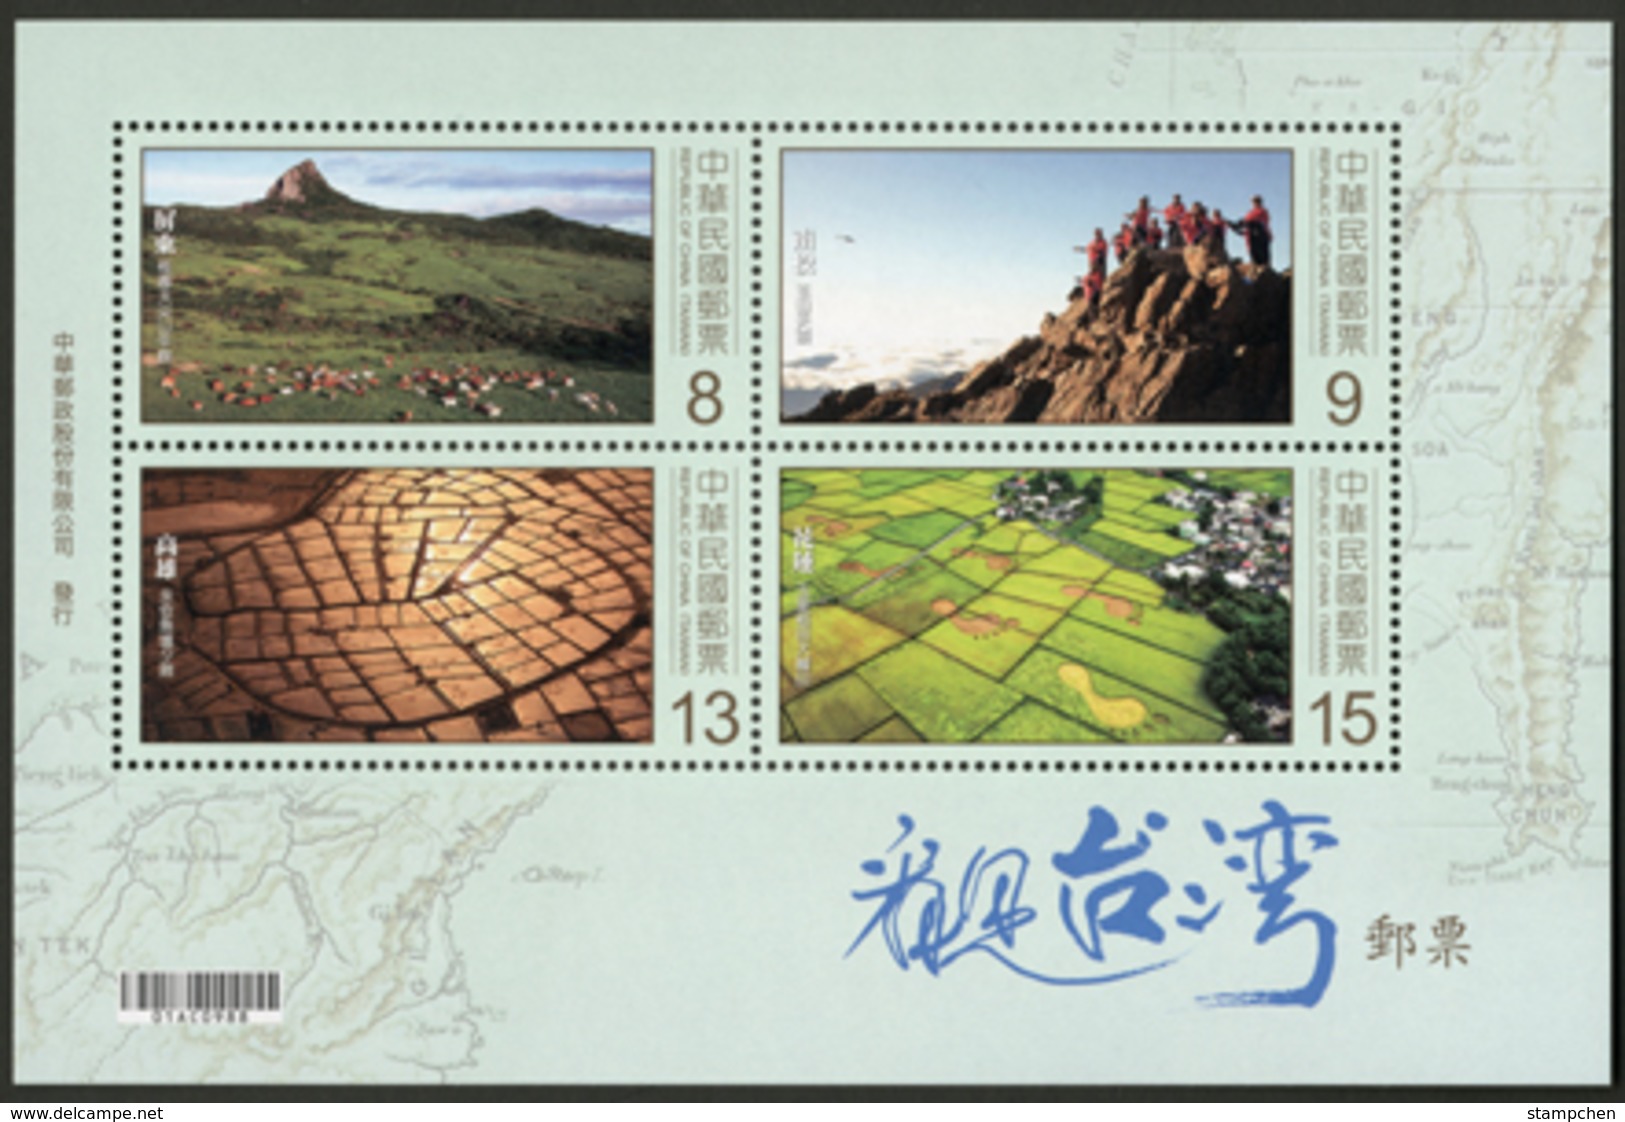 2018 Taiwan From The Air Stamps S/s Cattle Cow Mount Fish Paddy Field Farm Map Helicopter - Agriculture